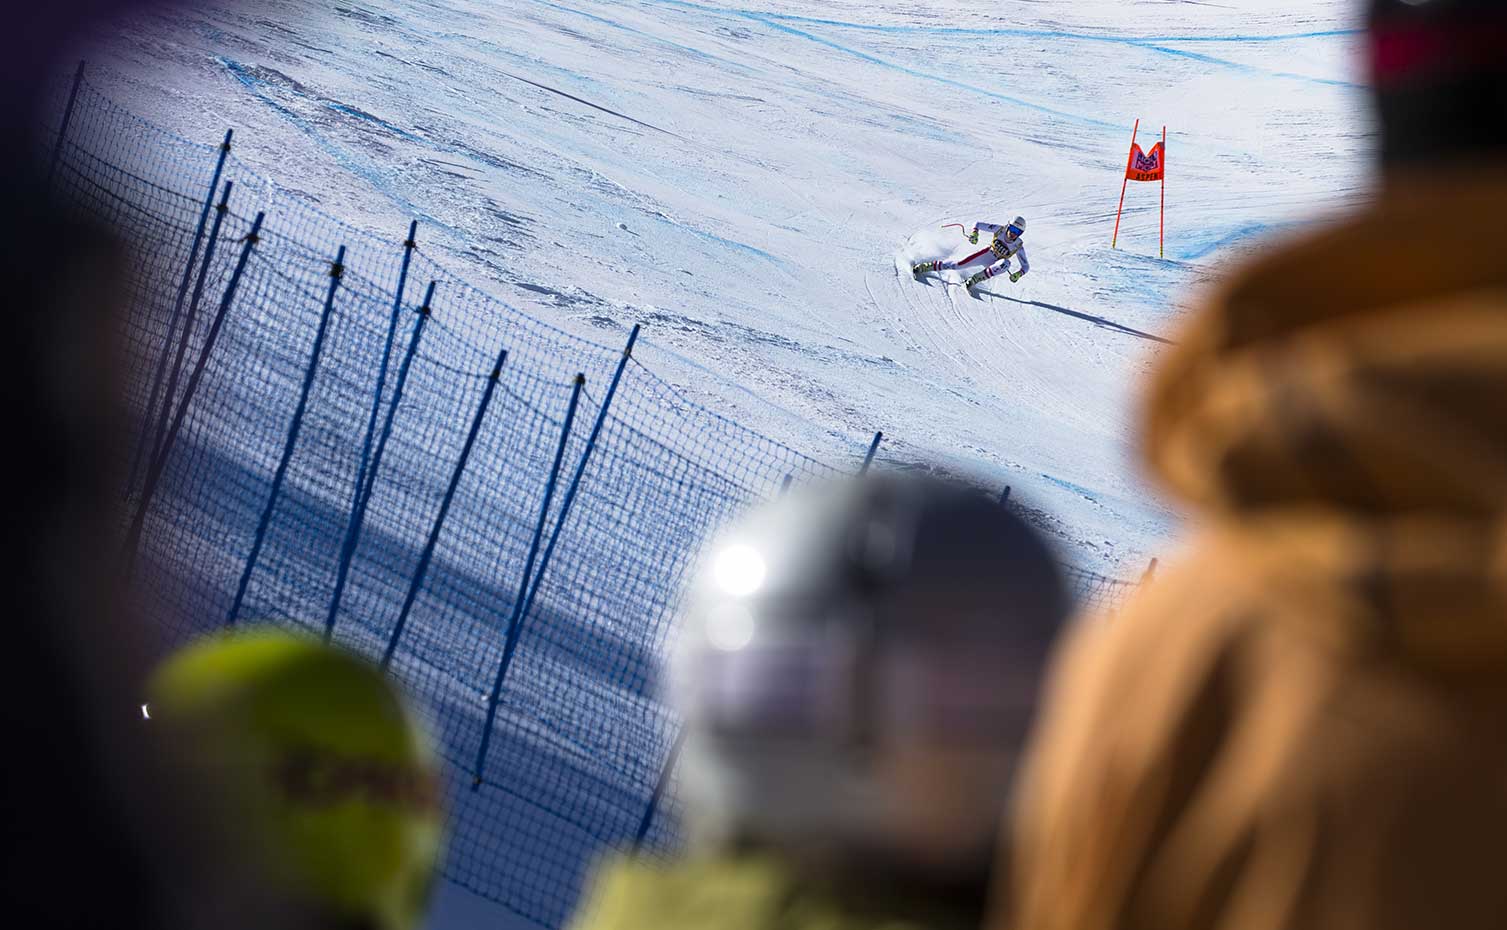 World Cup Racers to Watch Ski Racing Event Aspen Snowmass